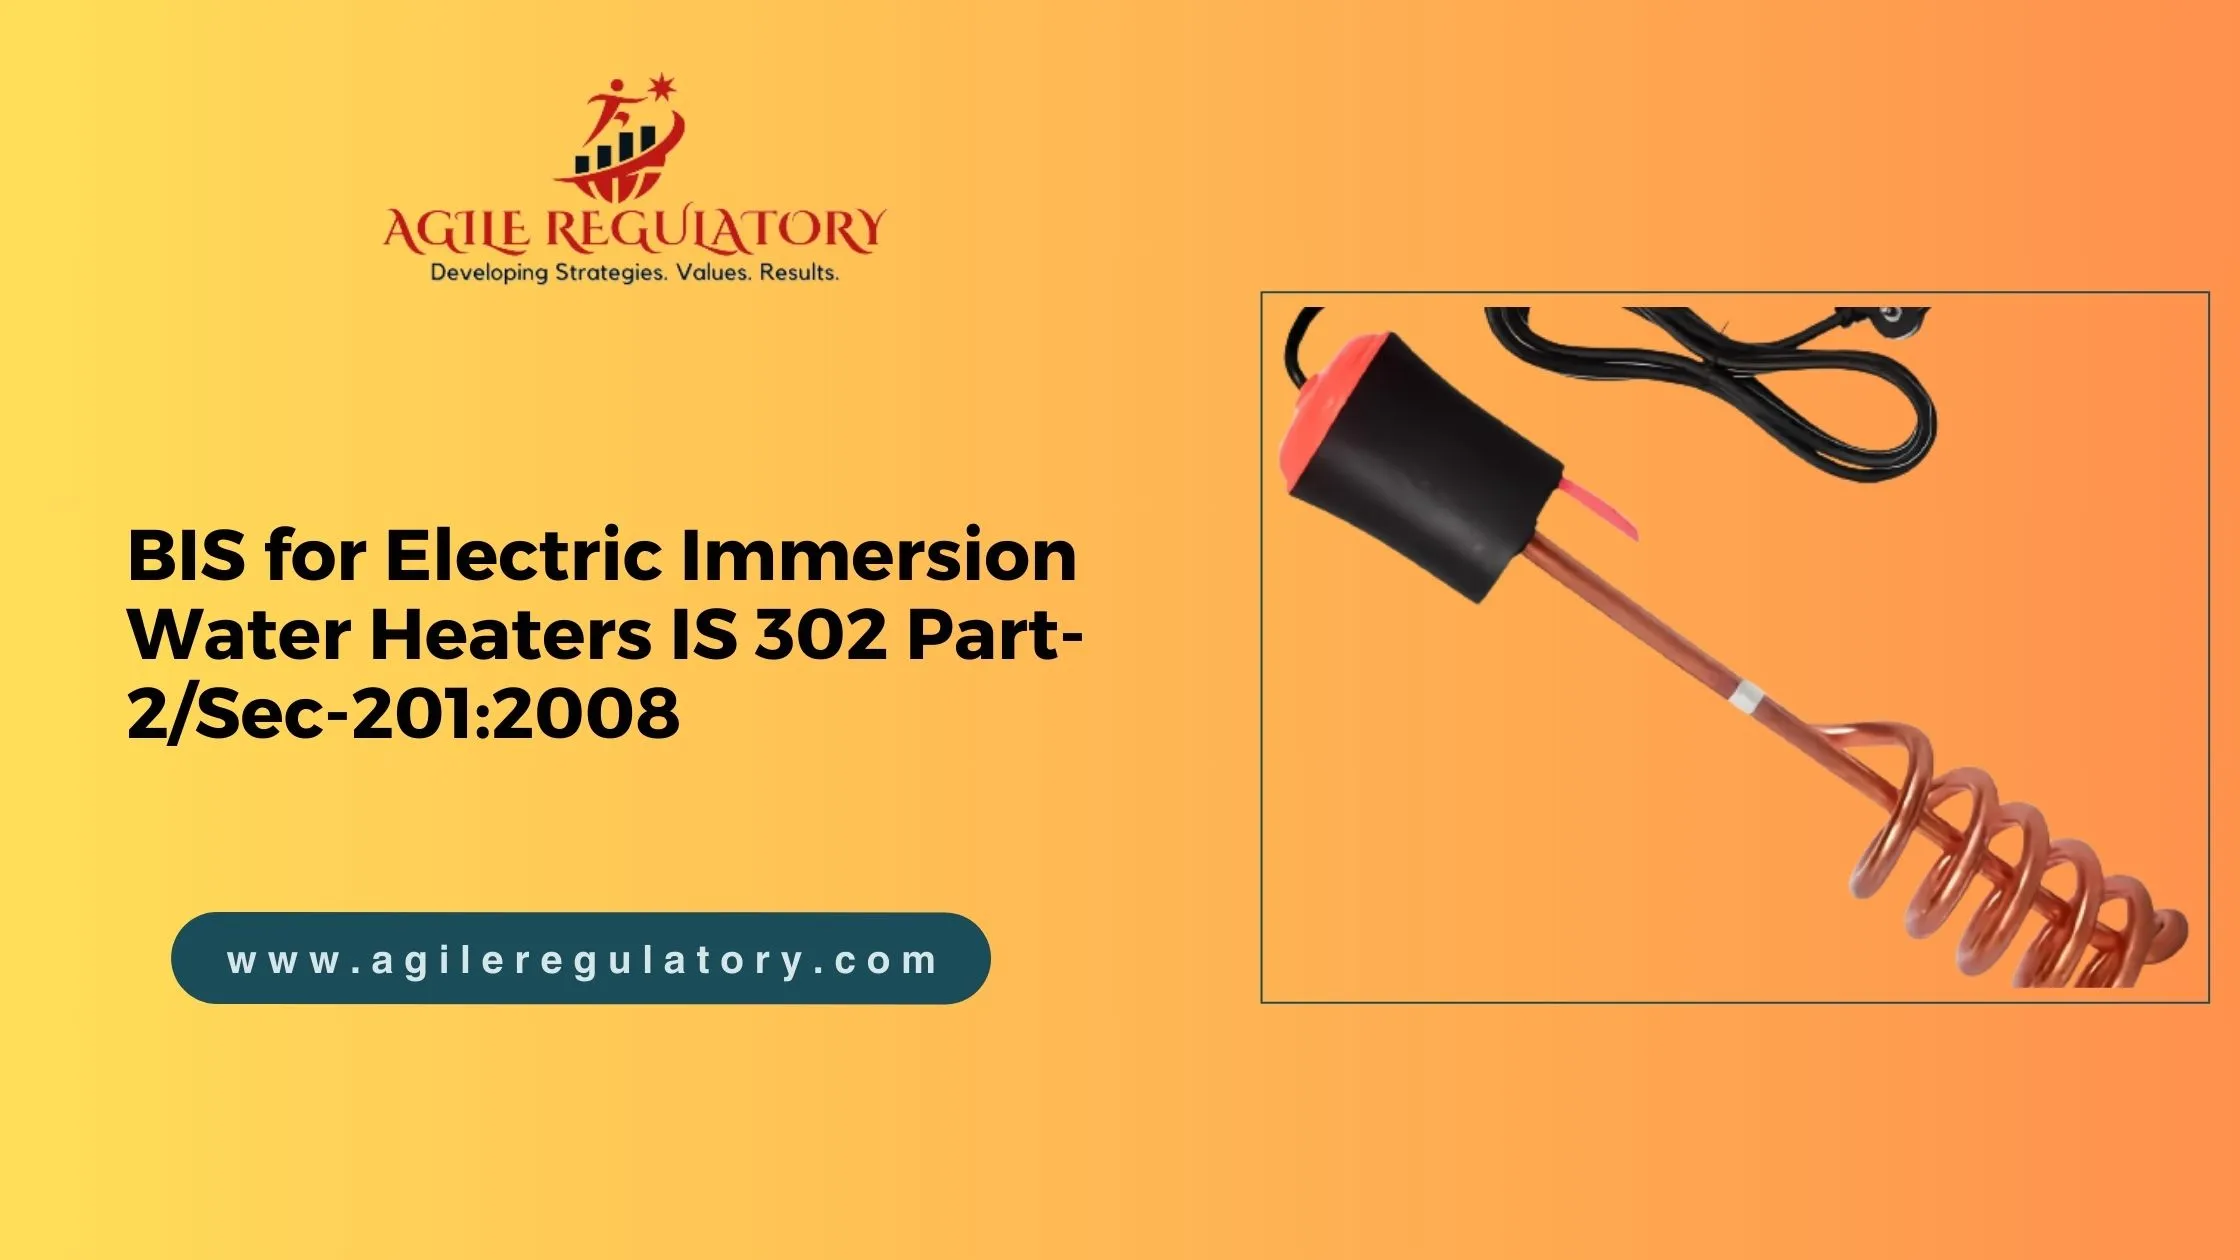 BIS ISI for Electric Immersion Water Heaters IS 302 Part-2/Sec-201:2008